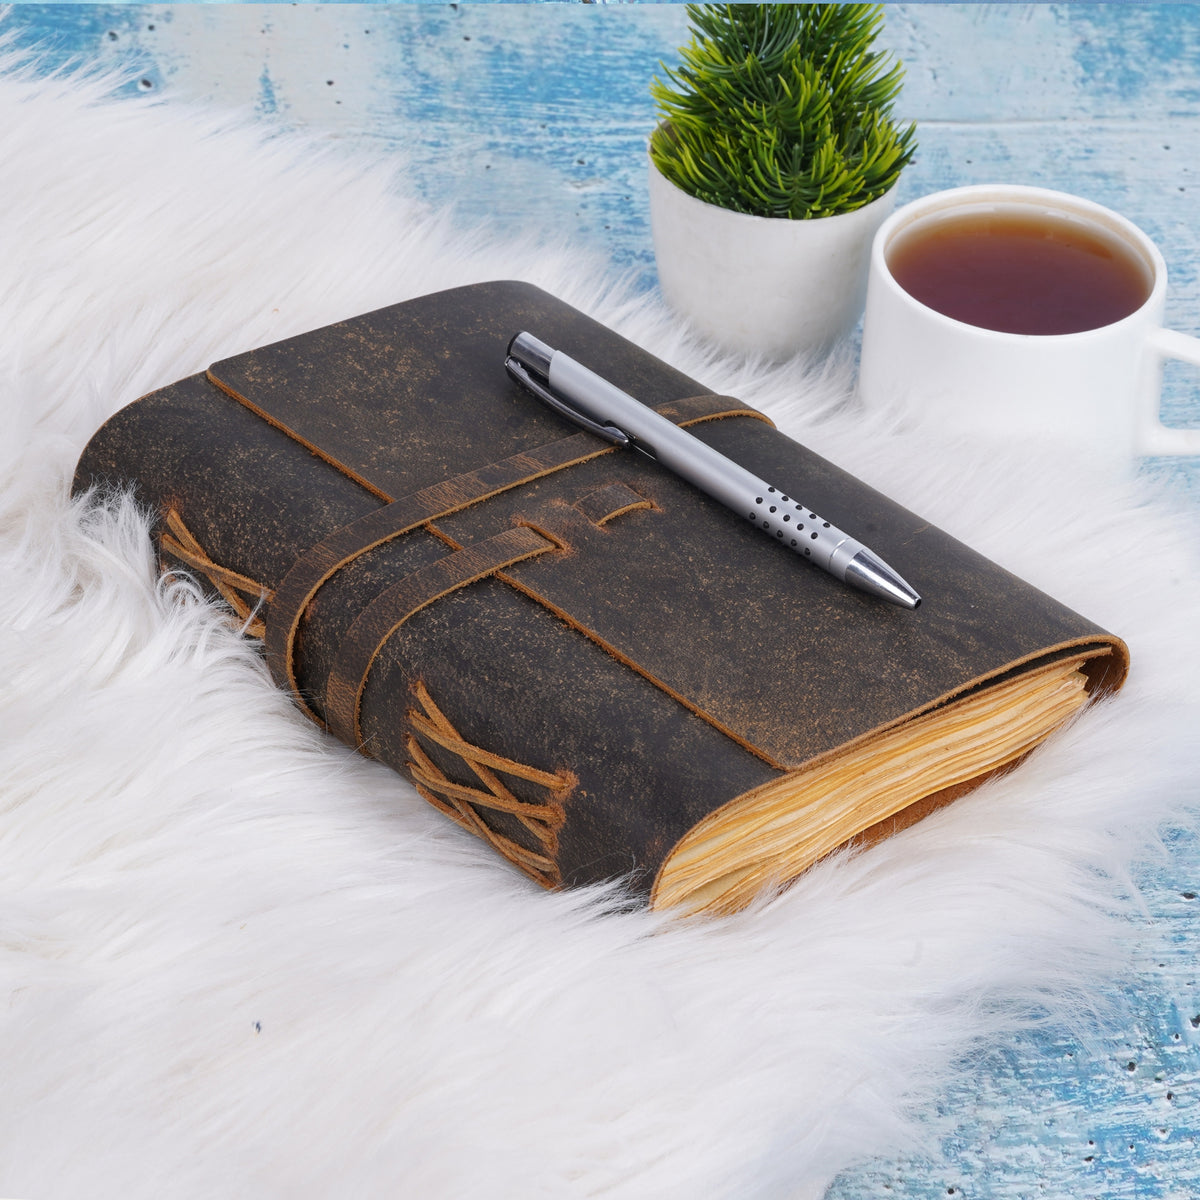 Vintage Leather Journal - Lined Paper Notebook